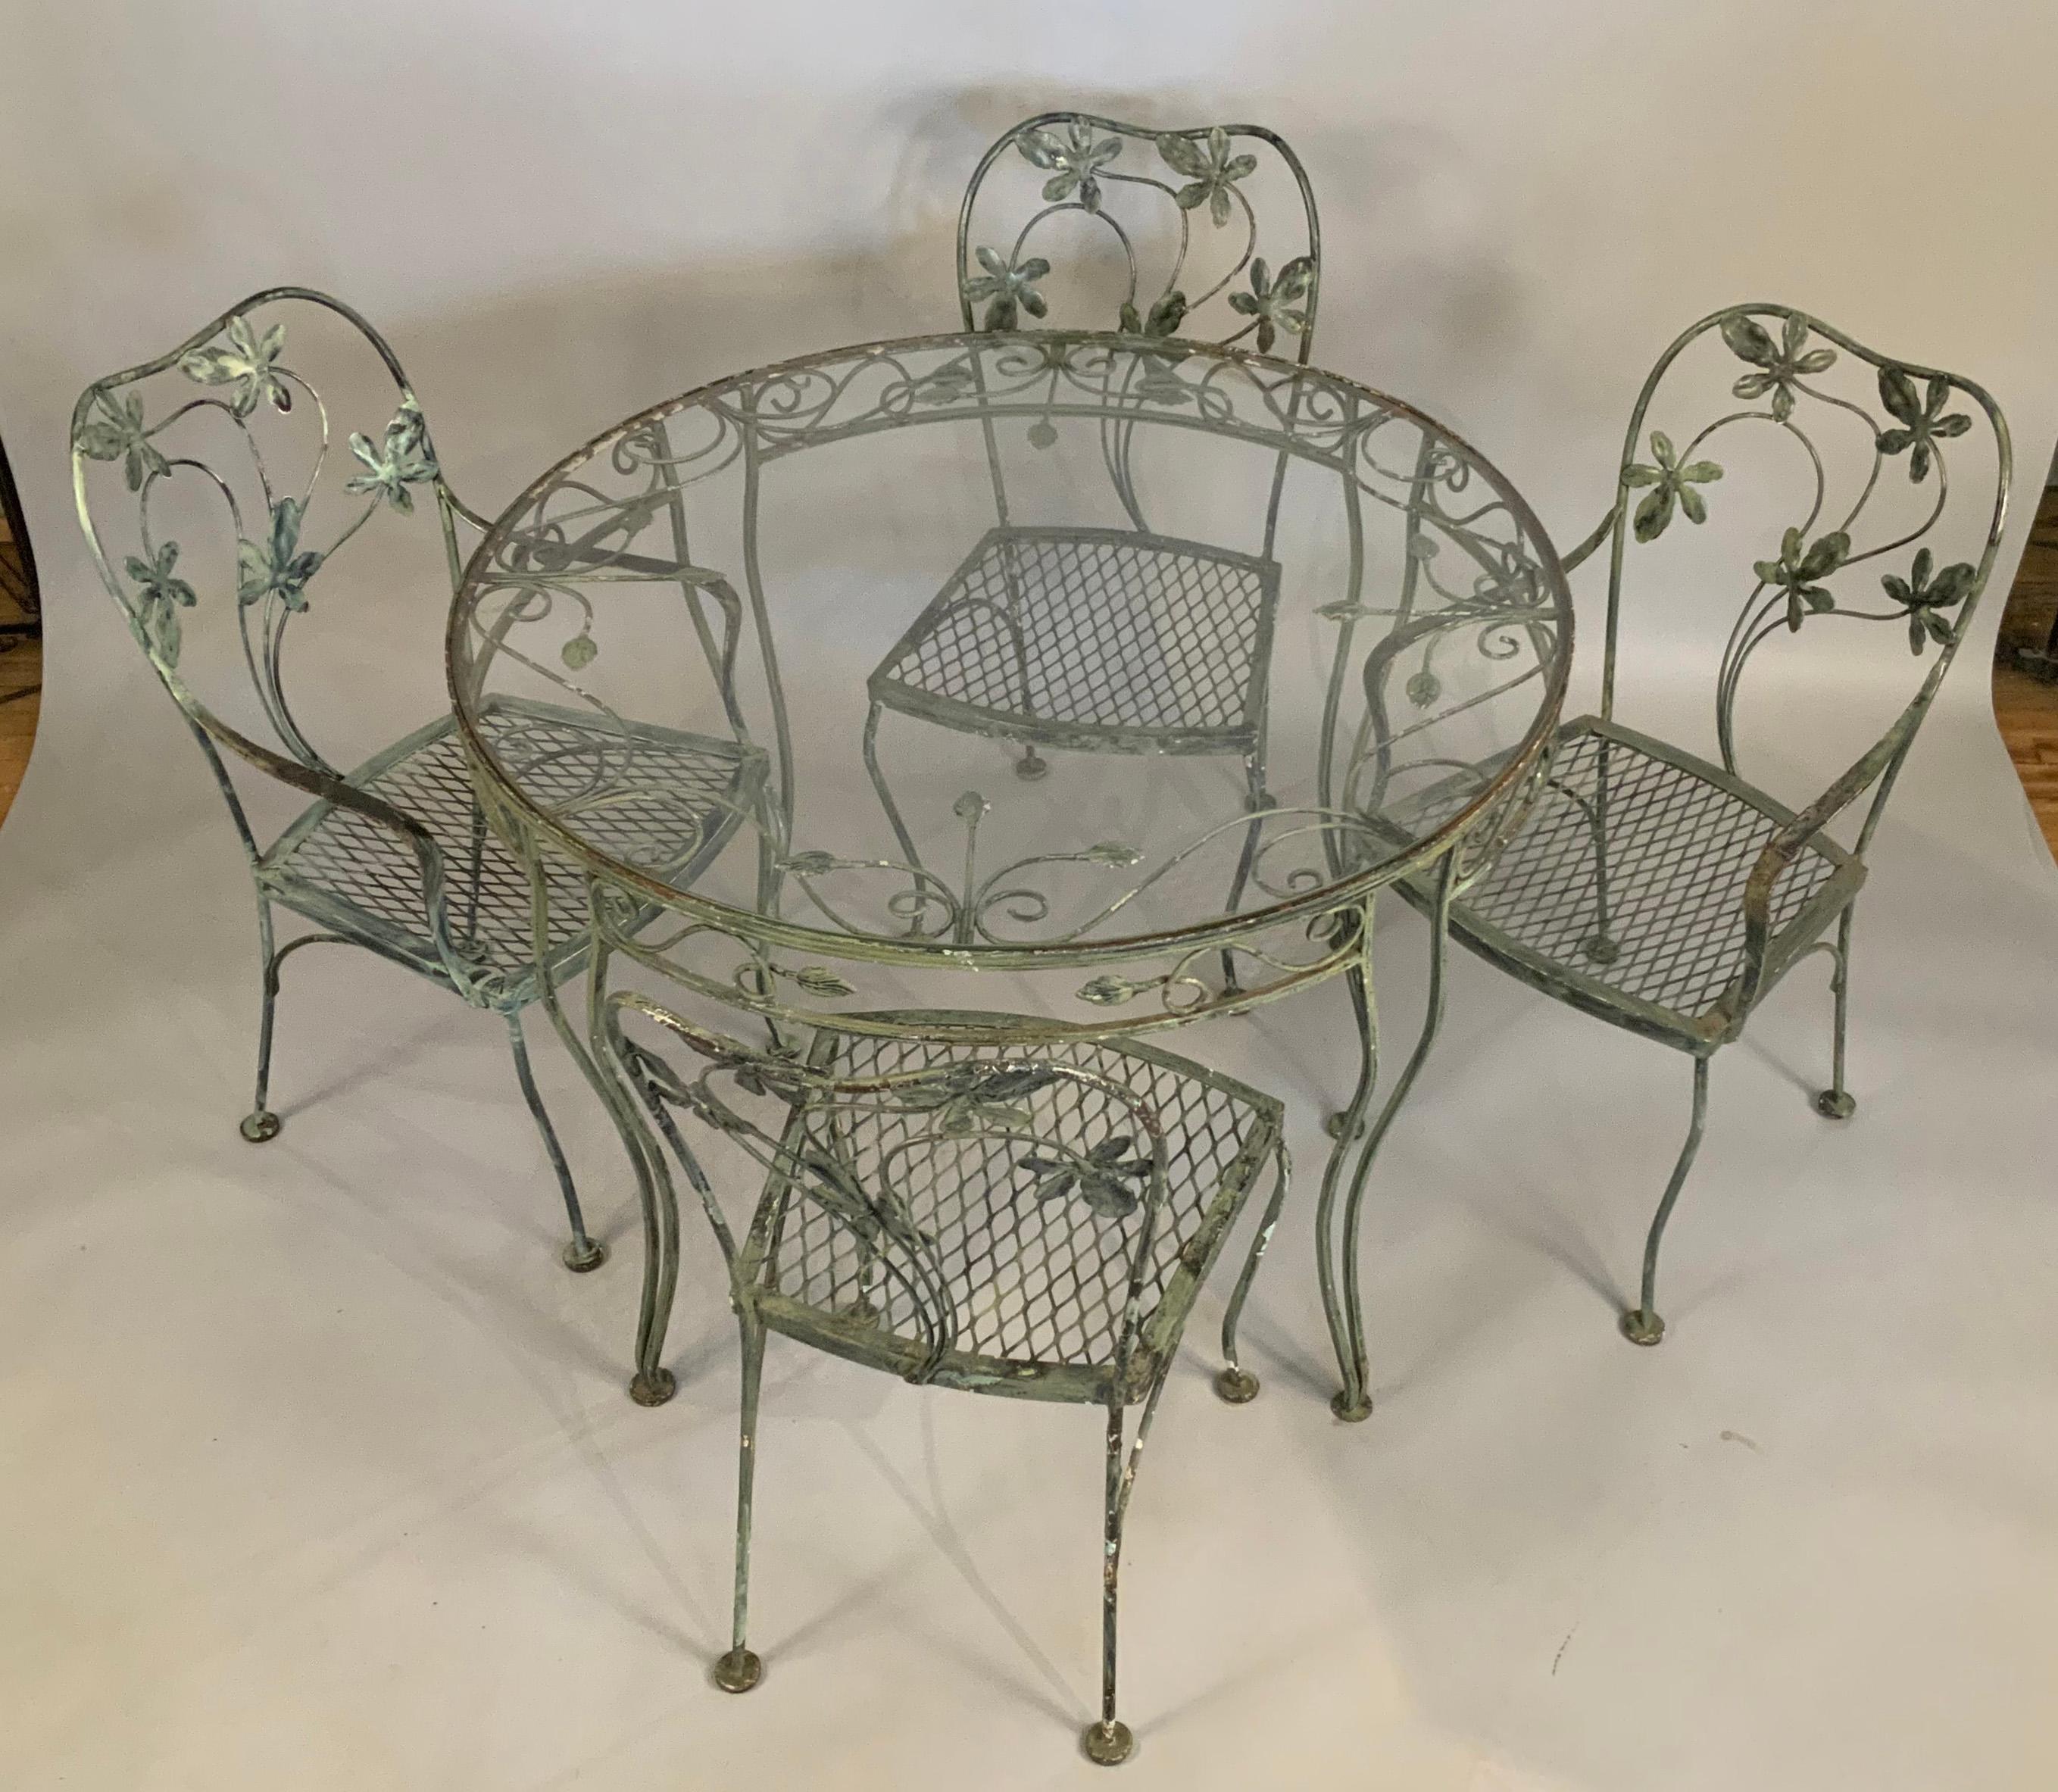 A beautiful vintage 1950's wrought iron dining set by Woodard. Wonderful large scale floral in the curved backs of the chairs, and a large glass top round table. all in good original condition, with some surface rust around the edge of the table as